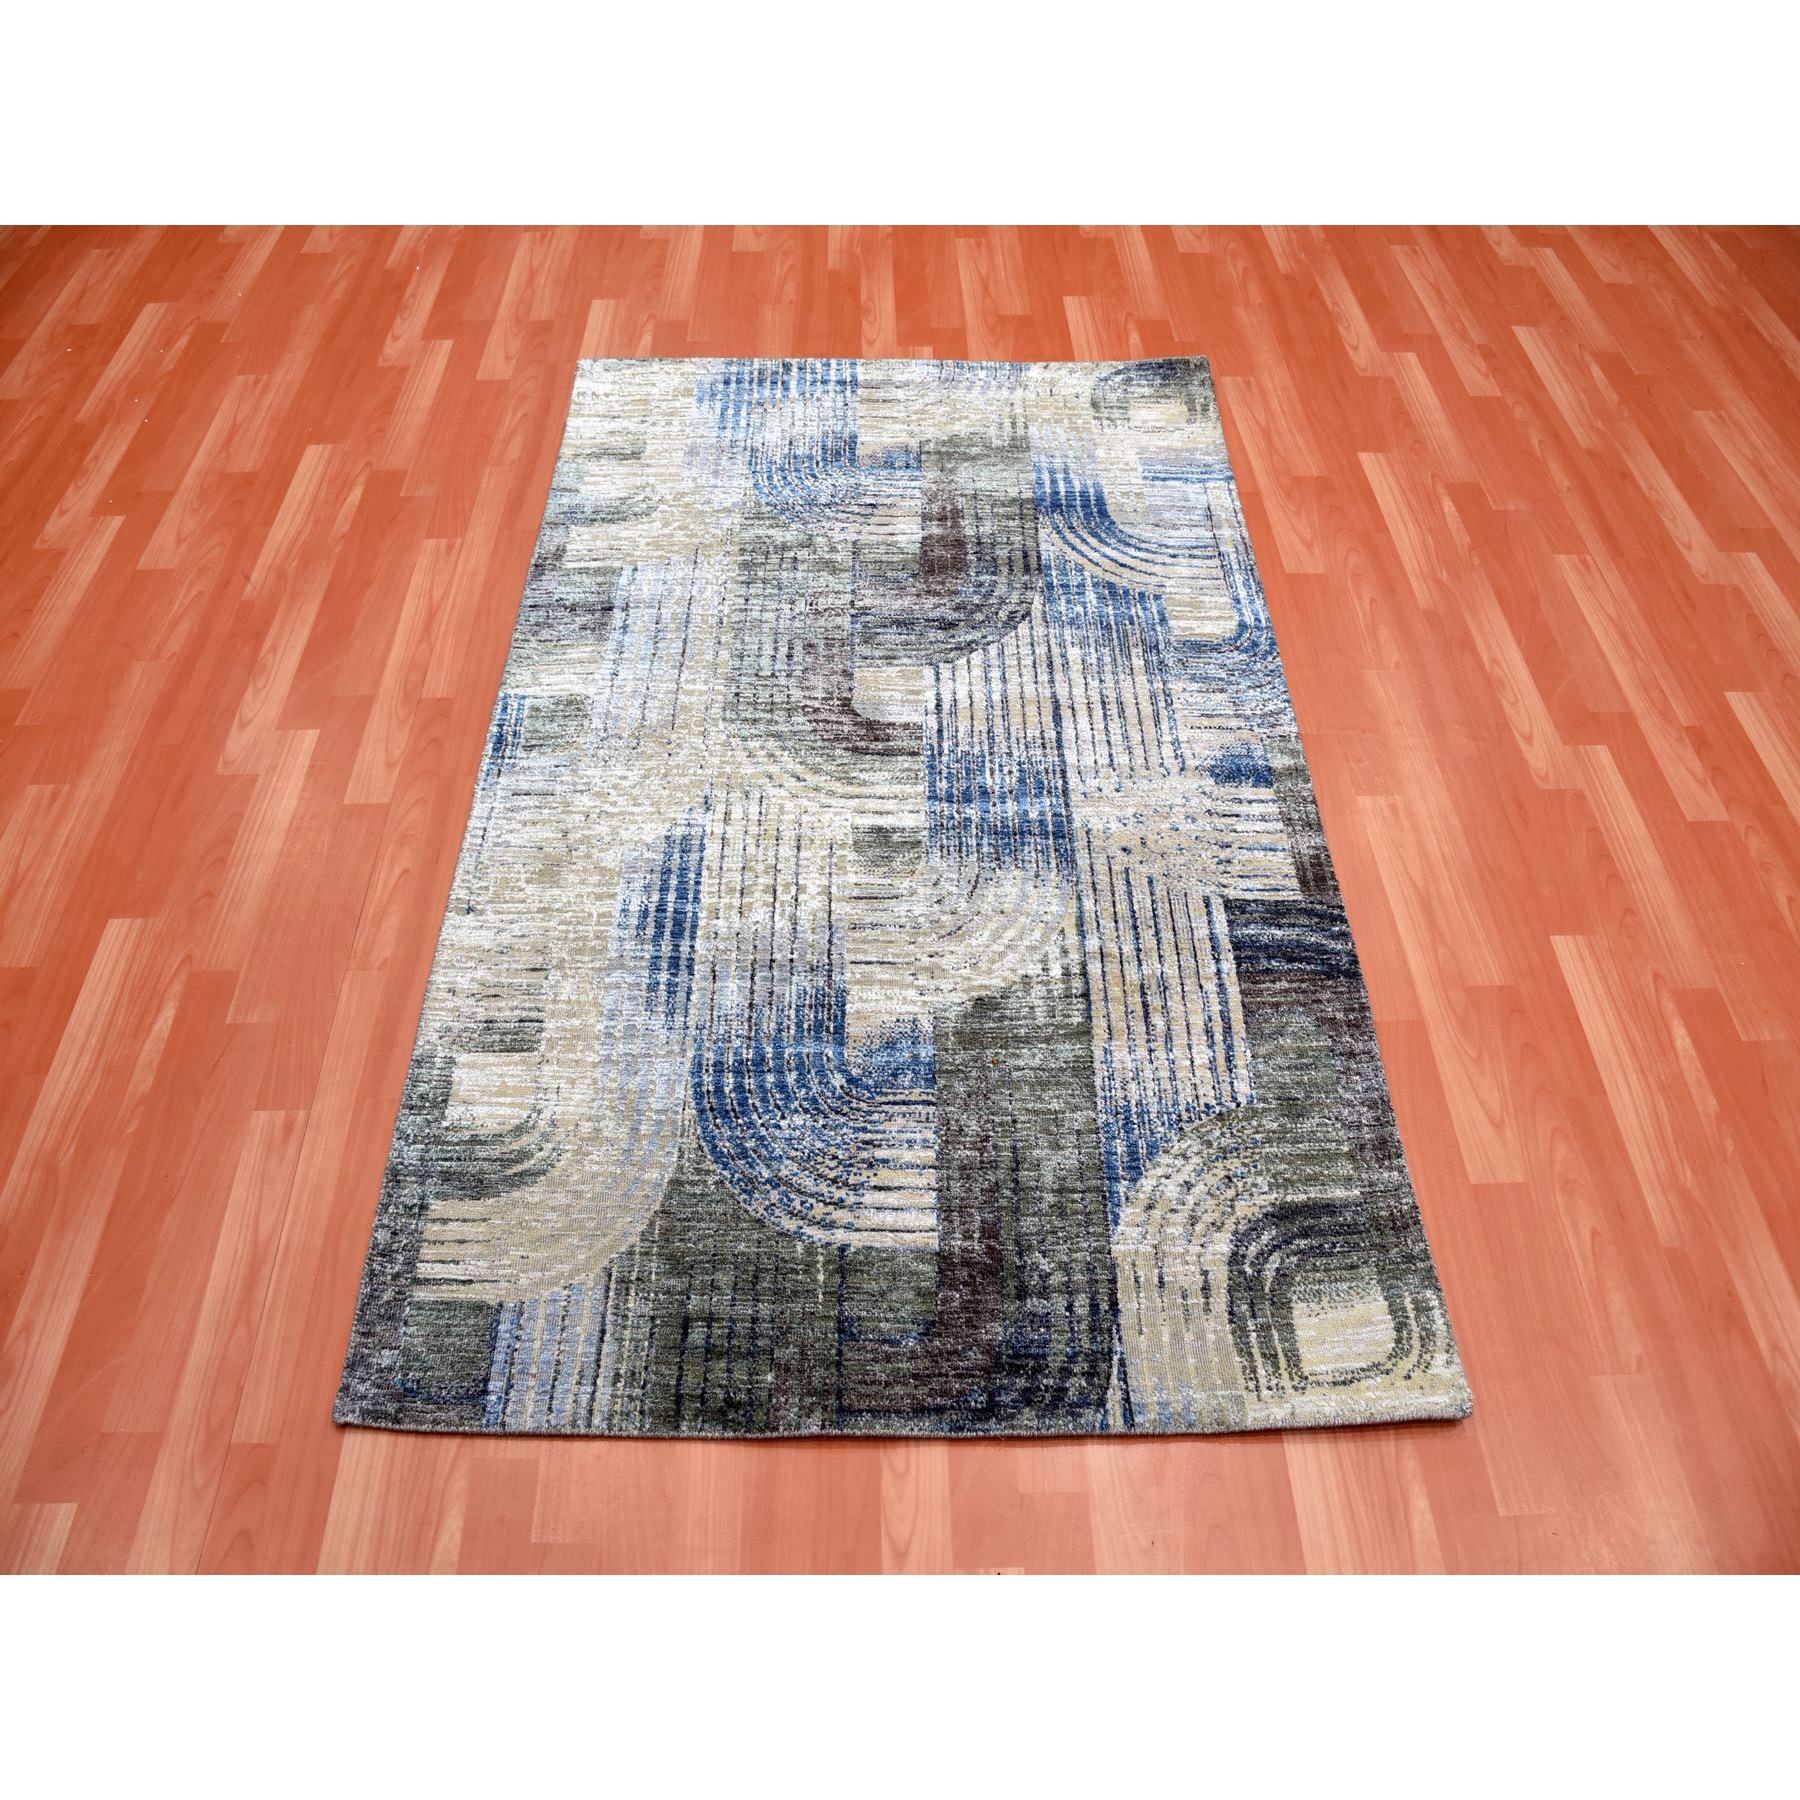 4'x6'1" THE INTERTWINED PASSAGE, Silk with Textured Wool, Hand Woven Oriental Rug 